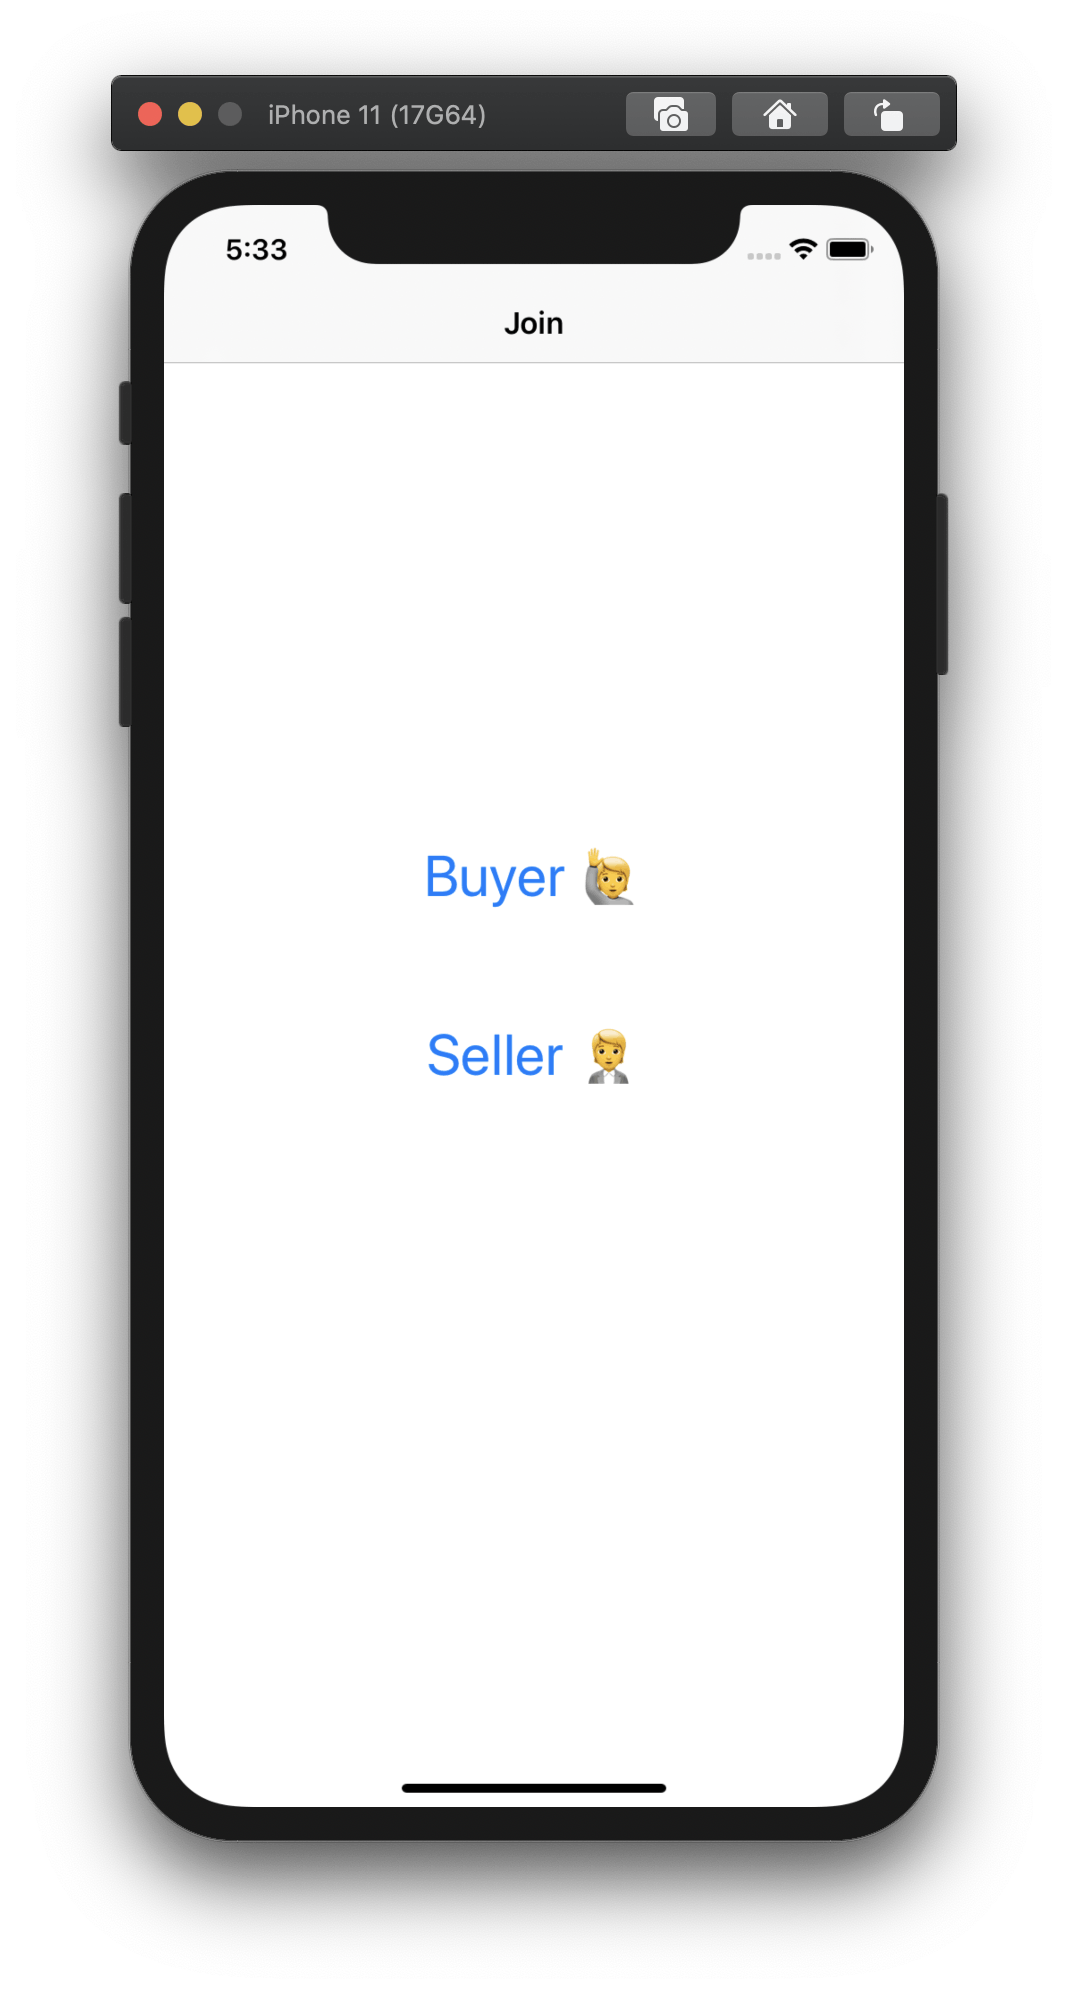 Screenshot shows an app with two buttons, one to join as a buyer, and the other to join as the seller